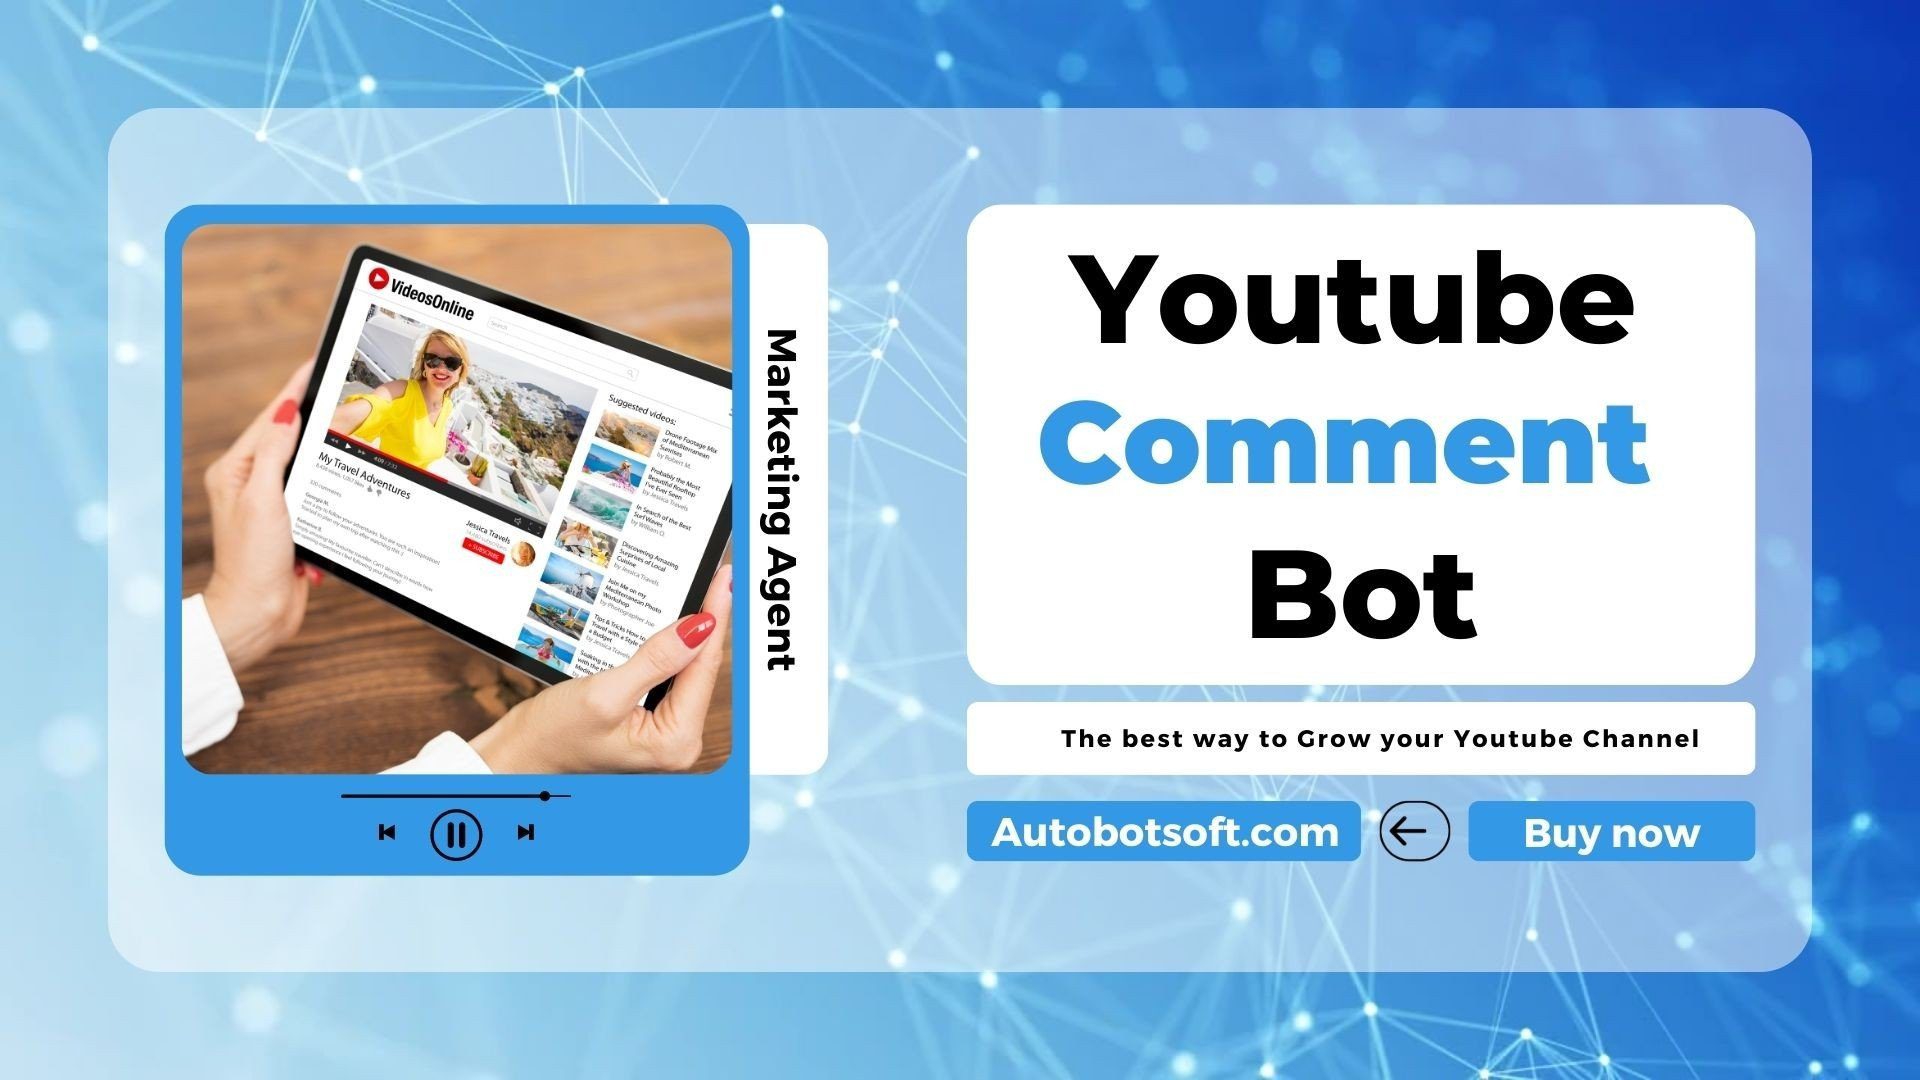 Youtube comment bot - The best way to grow your YT channel